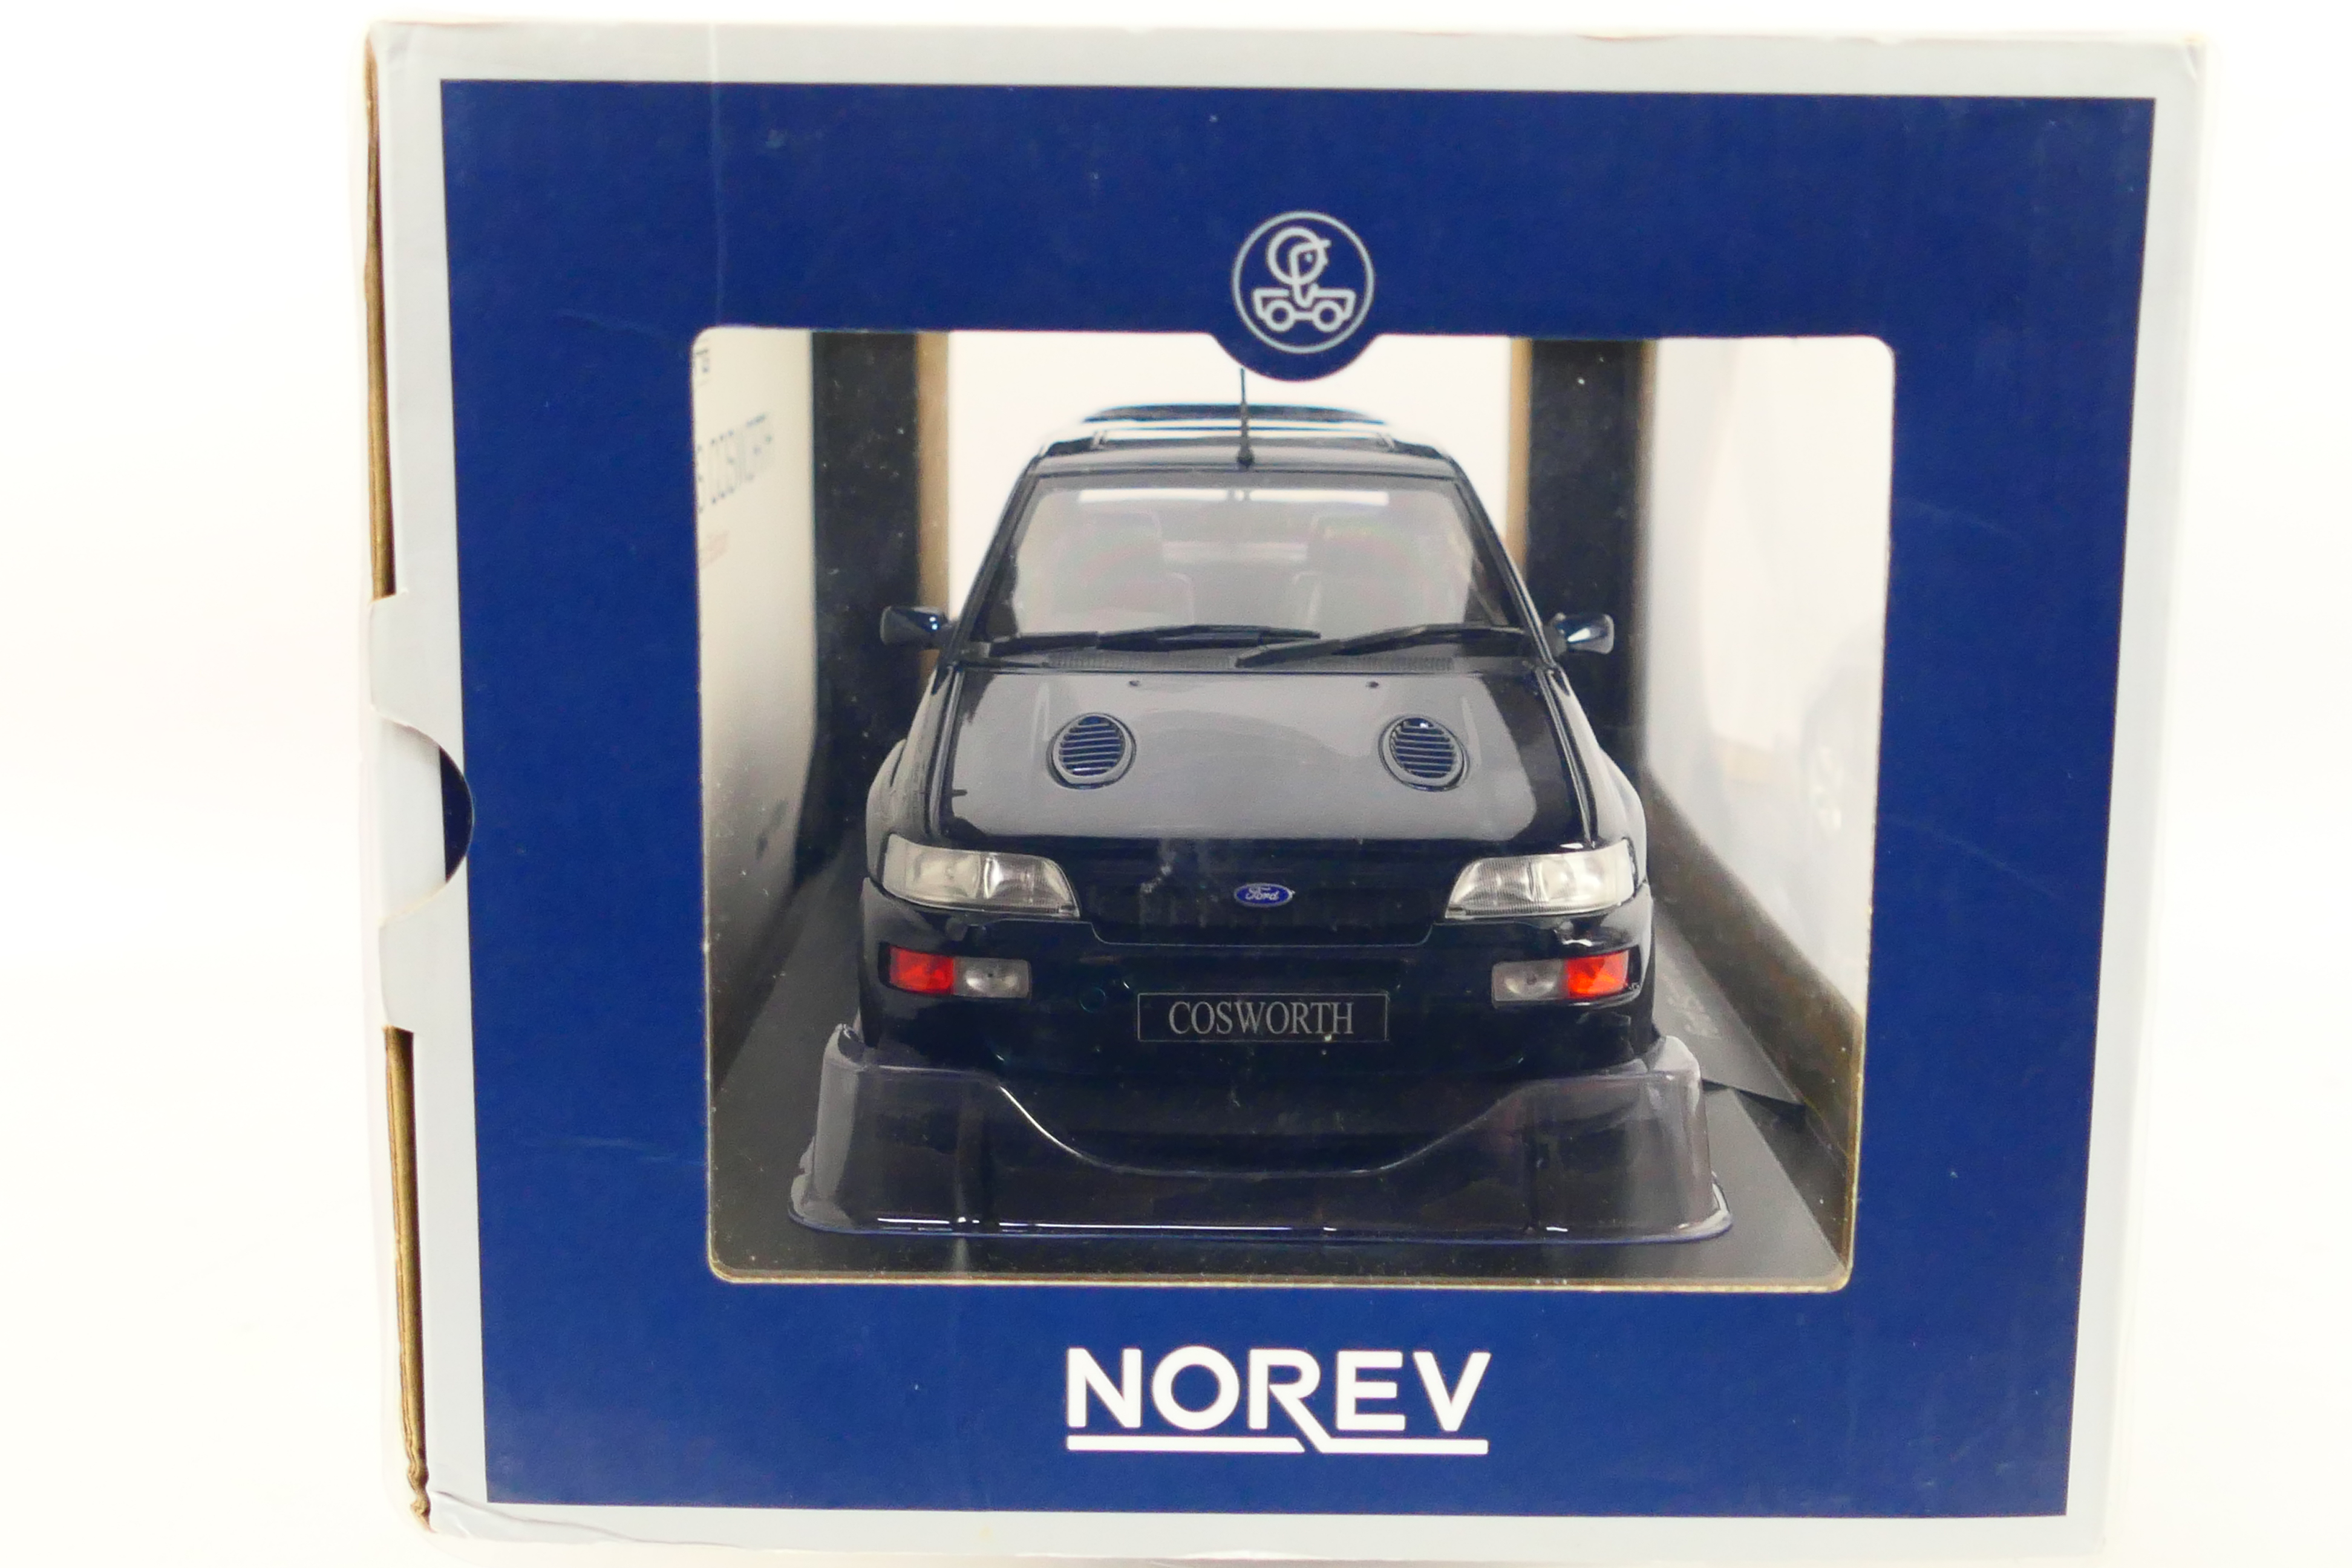 Norev - A boxed 1:18 scale Norev #182777 Ford Escort Cosworth 1992. - Image 4 of 5